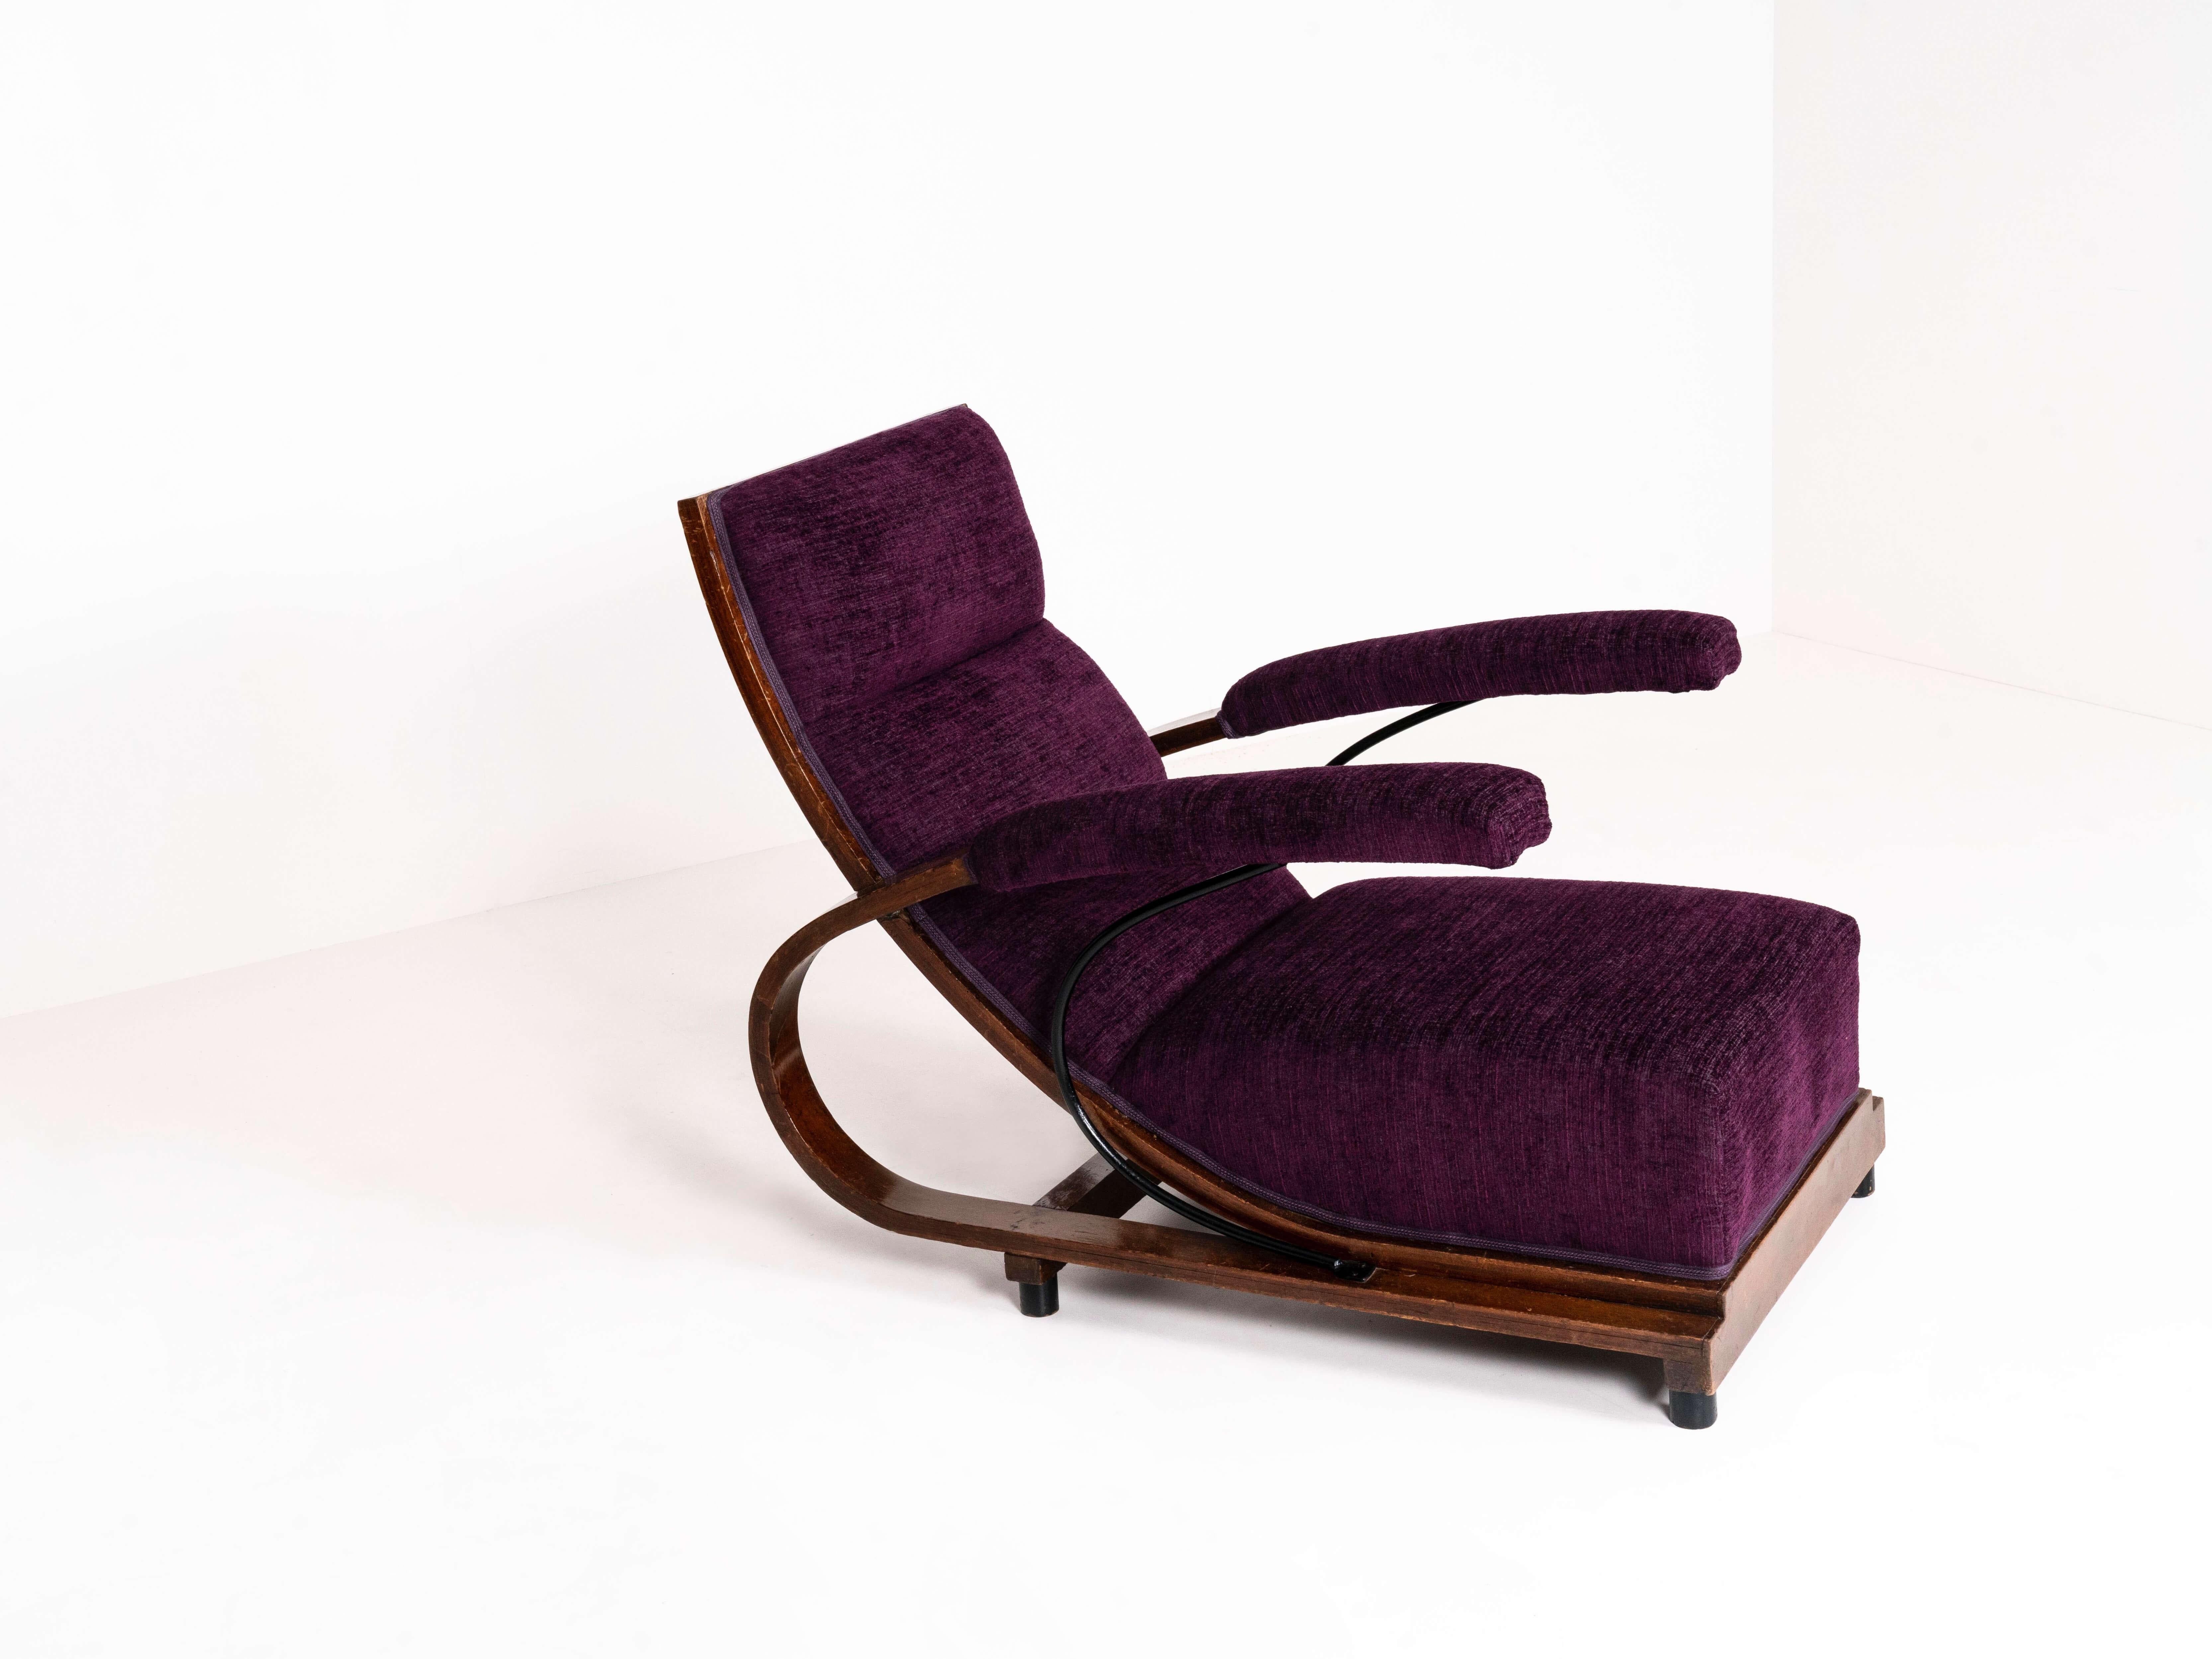 Rare Art Deco armchair by Luigi Carlo Daneri from Italy 1933. This chair in walnut and bent plywood has an exceptional design with a metal tube to reinforce the armrests. This chair is completely re-upholstered in dark purple, wine-colored fabric.